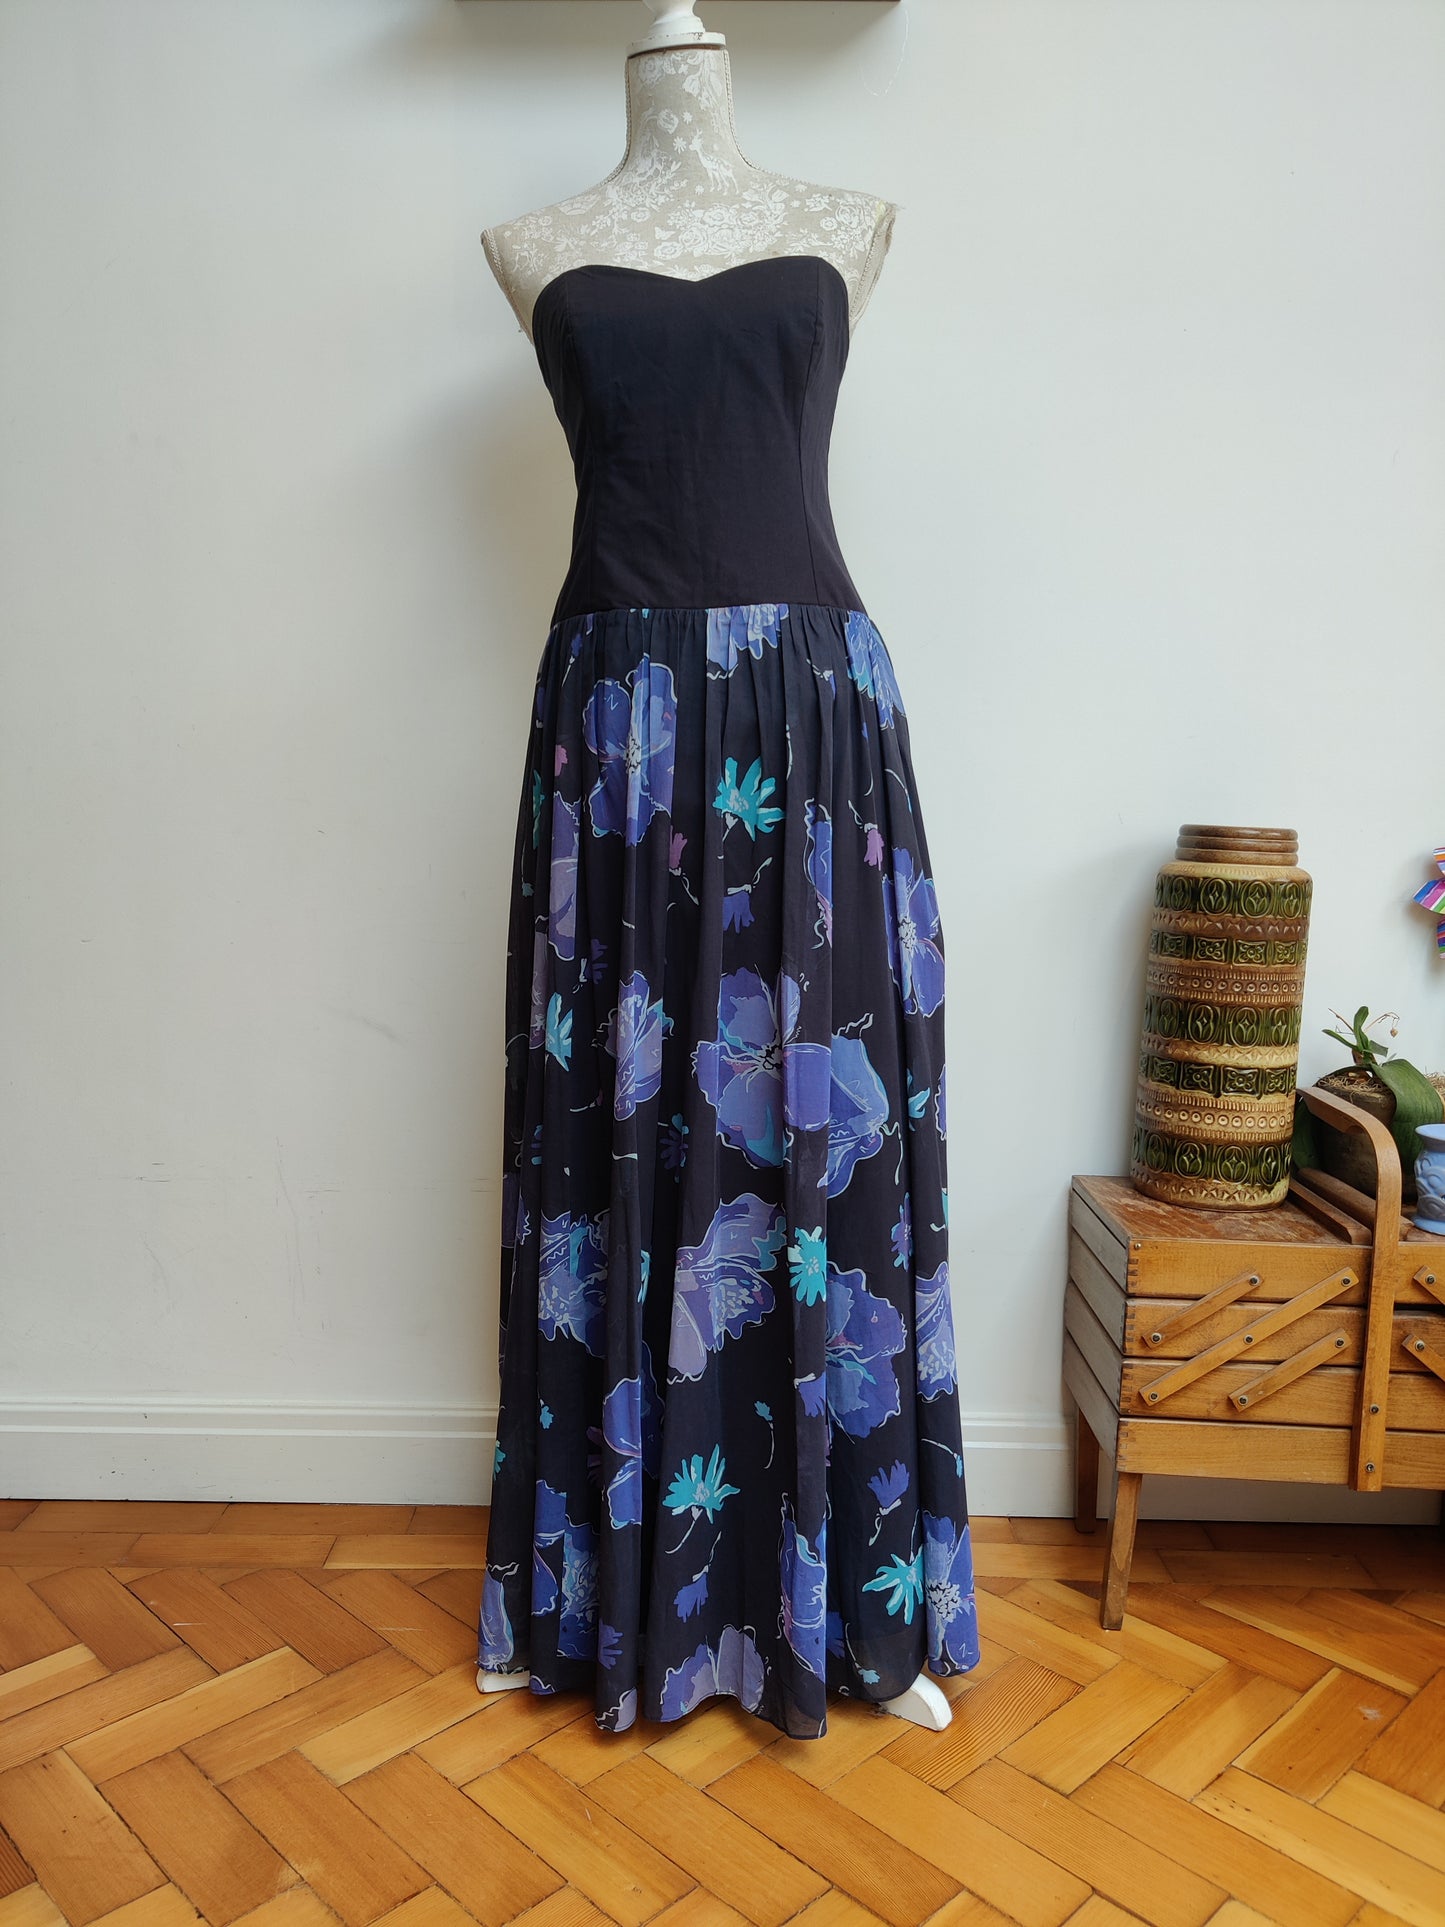 Black and blue floral Laura Ashley 80s dress.